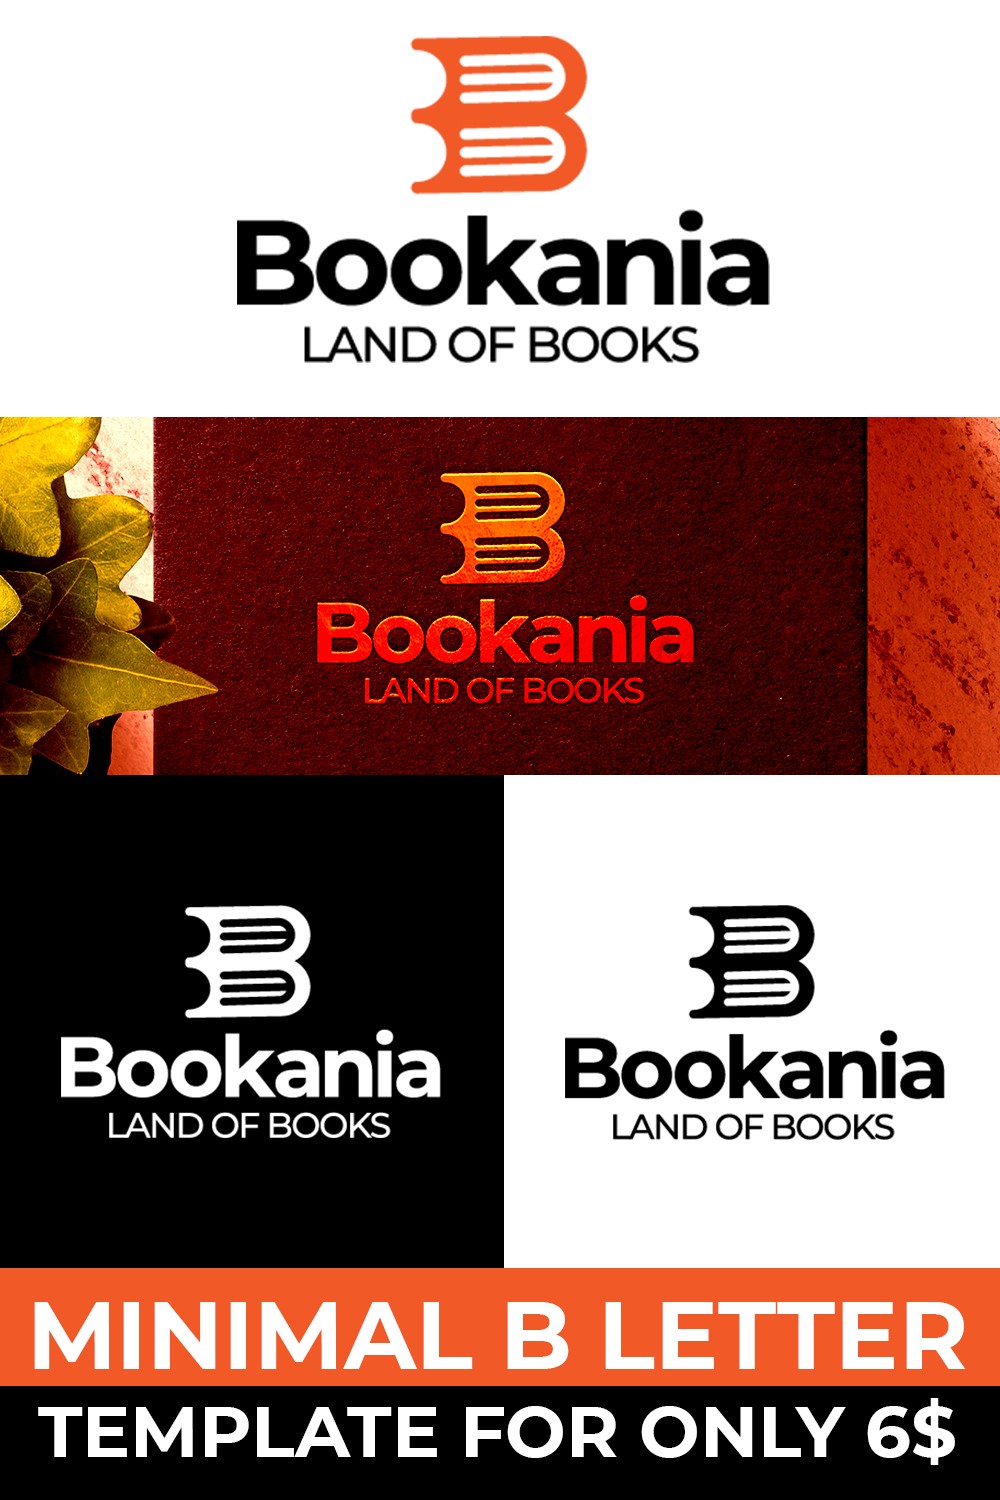 Some examples of using B logo.